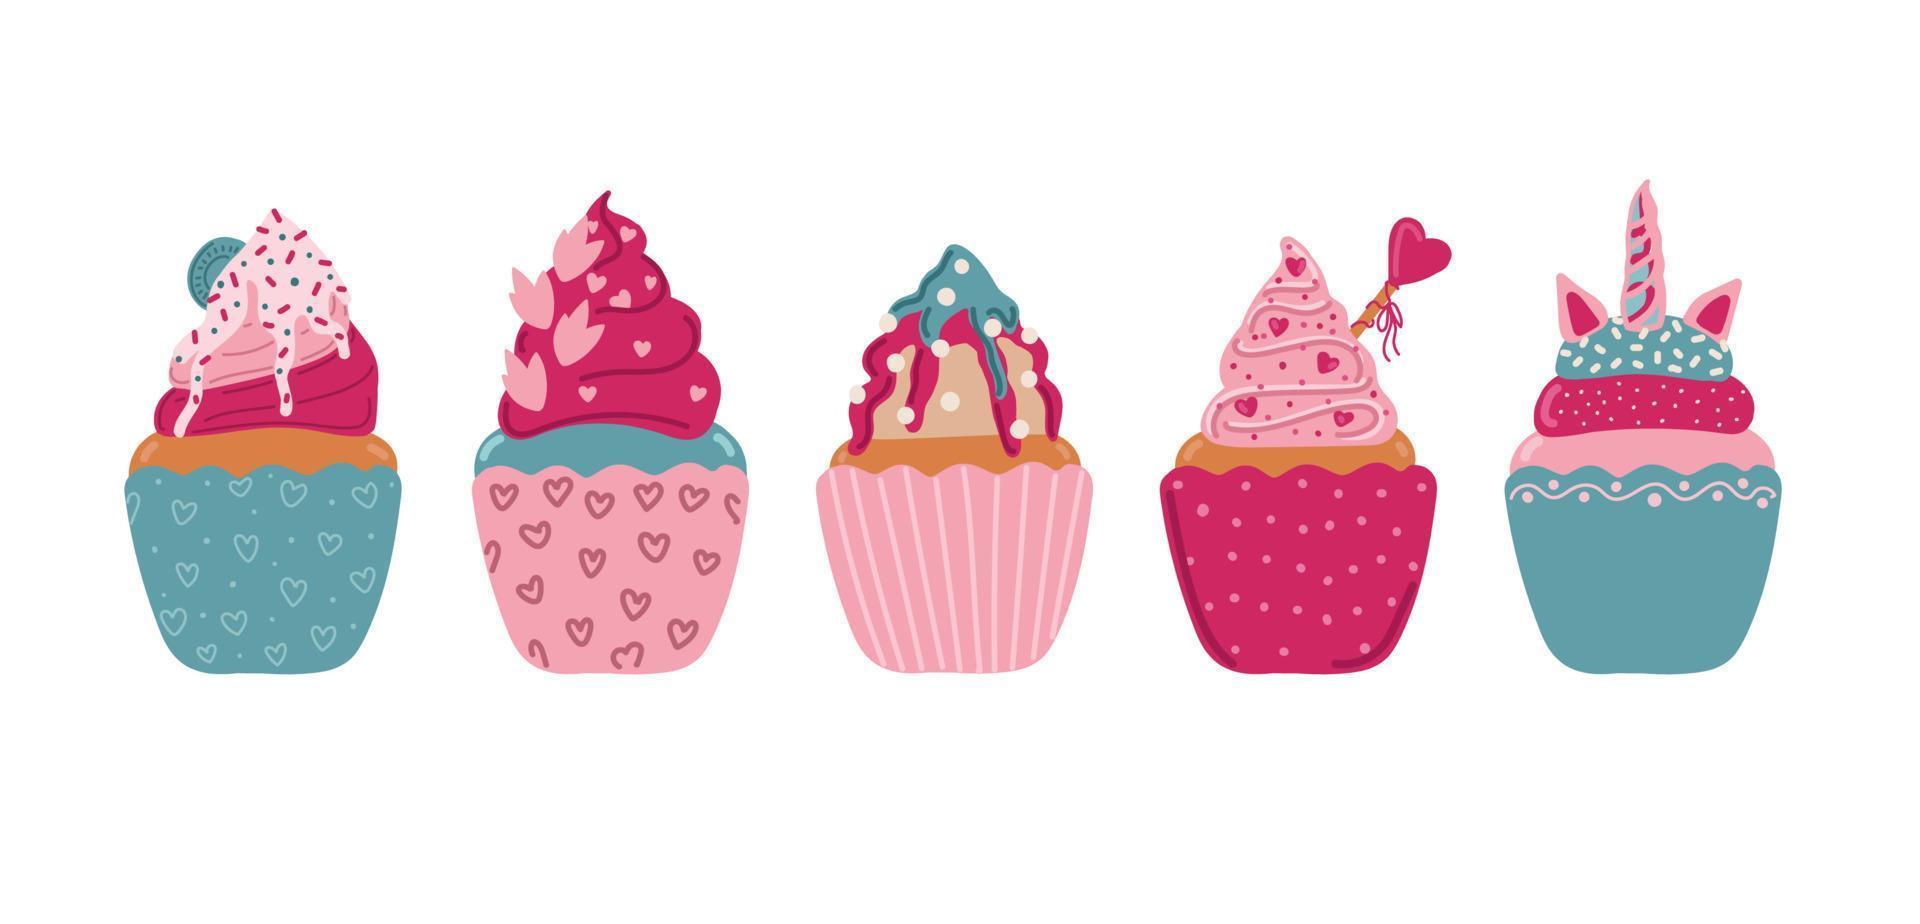 Valentine s day set of cupcakes. Valentine s day elements that you can use to make your designs full of love vector